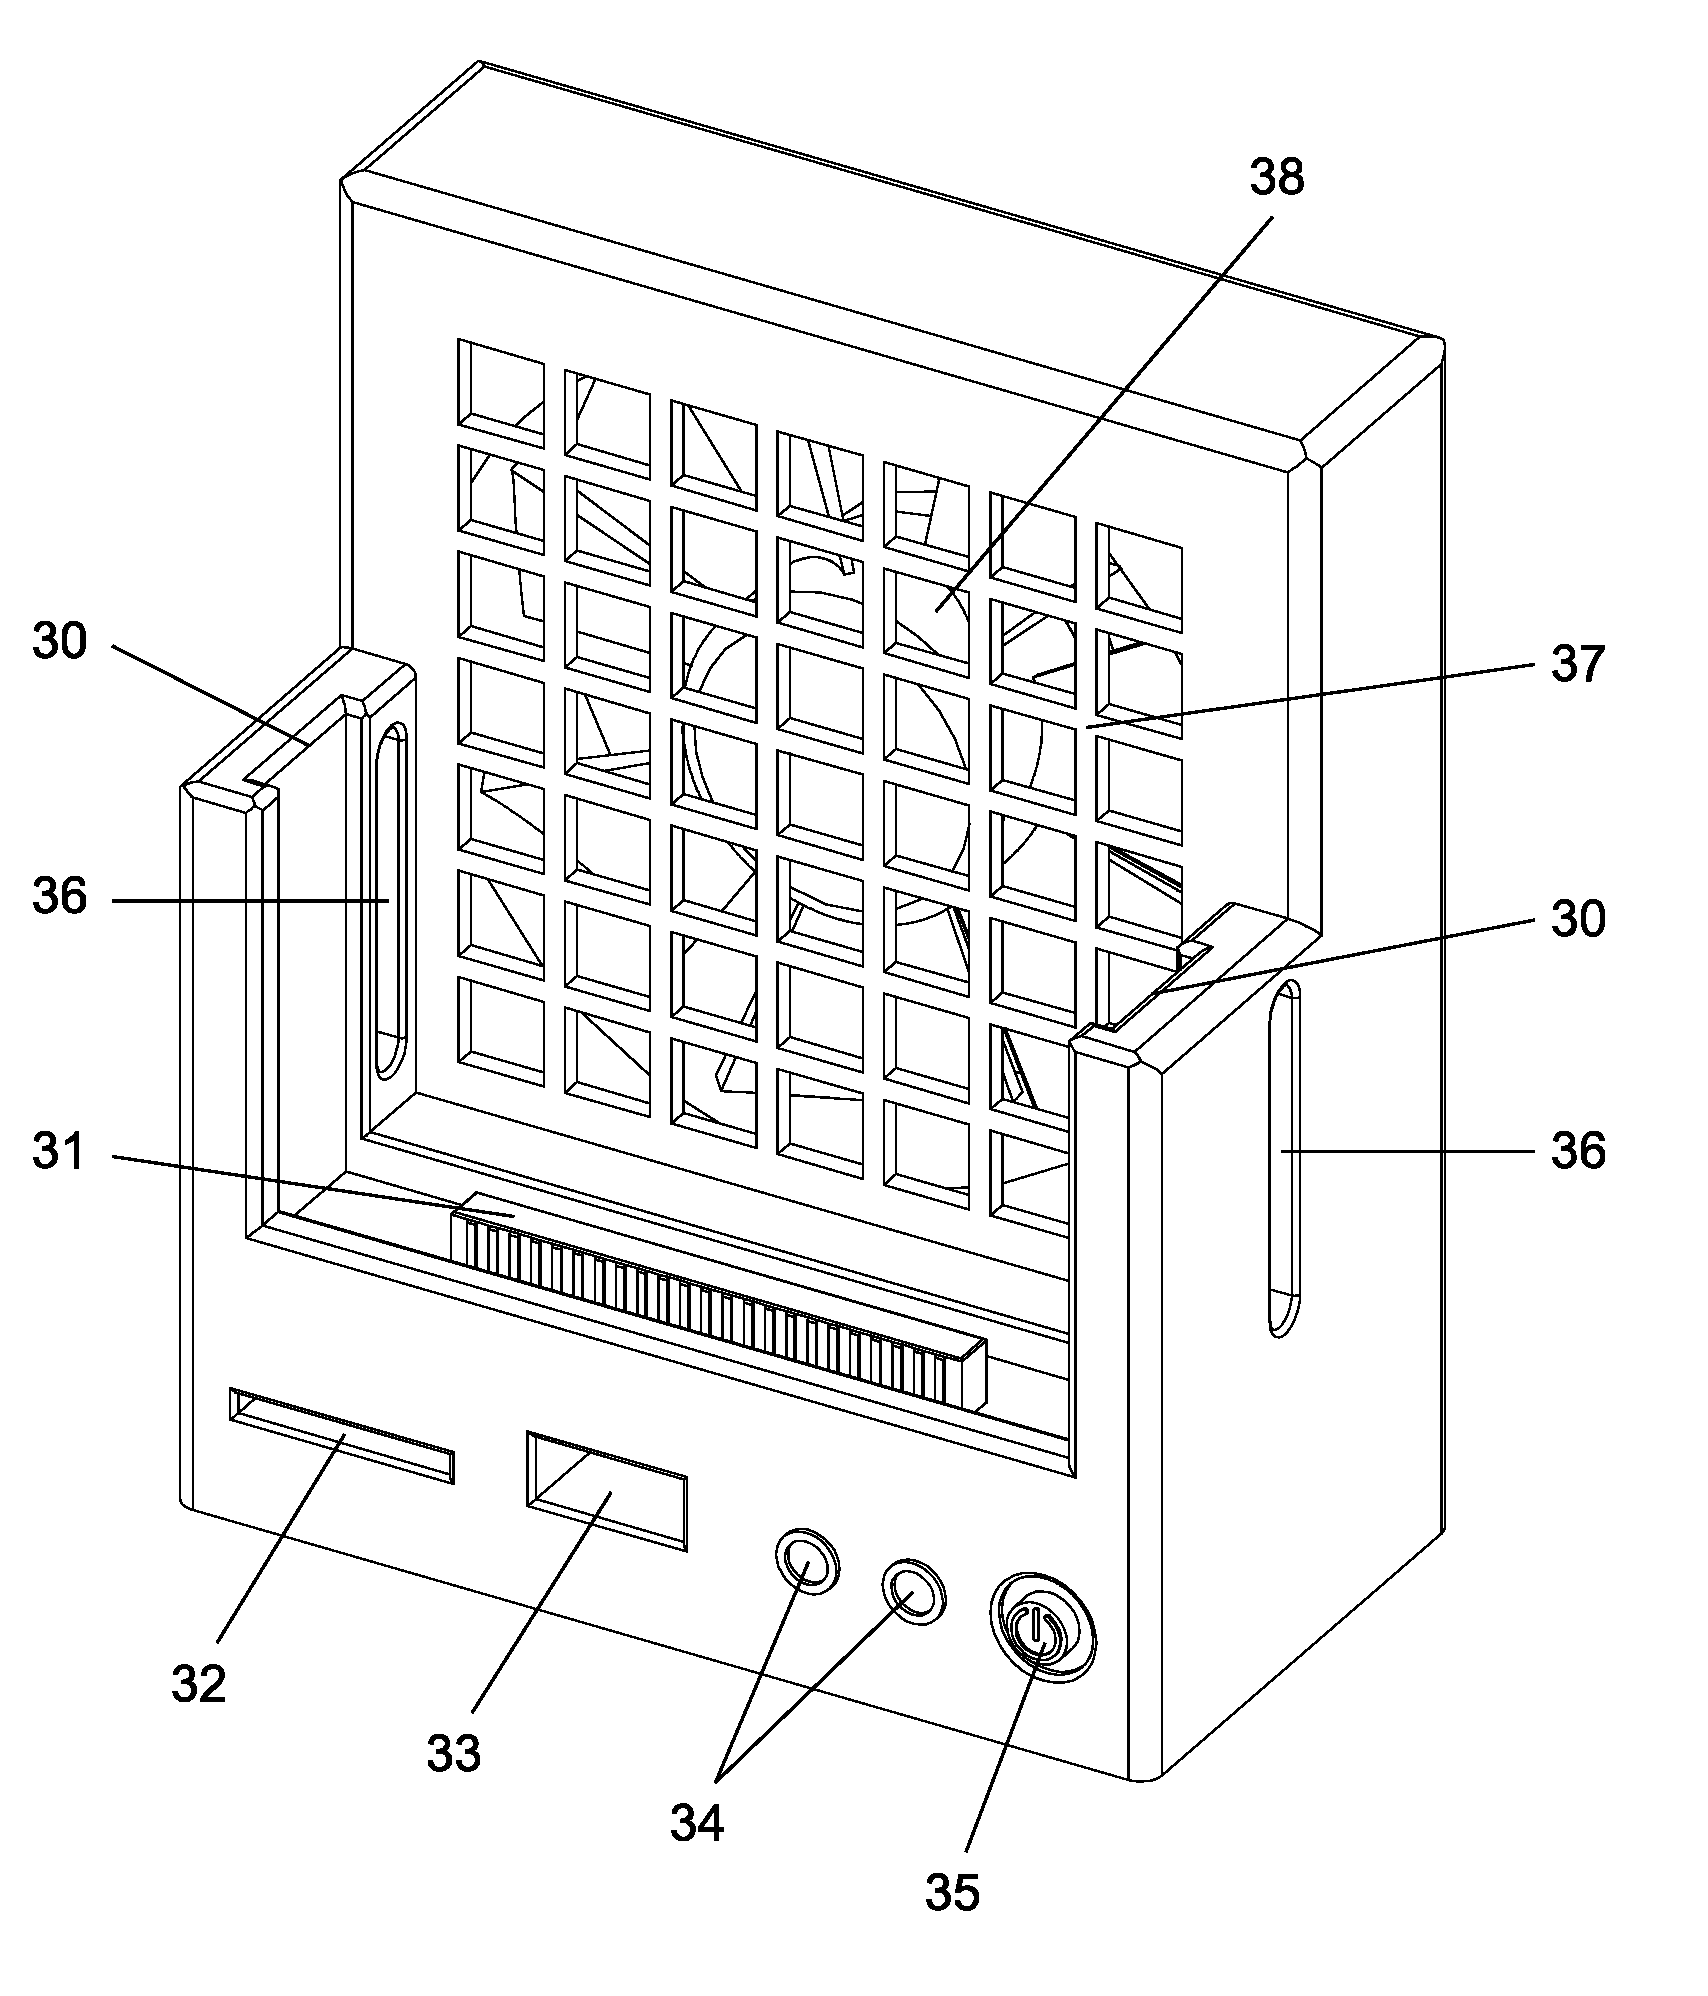 Heat Dissipation in a Mobile Device to Enable High-Performance Desktop Functionality